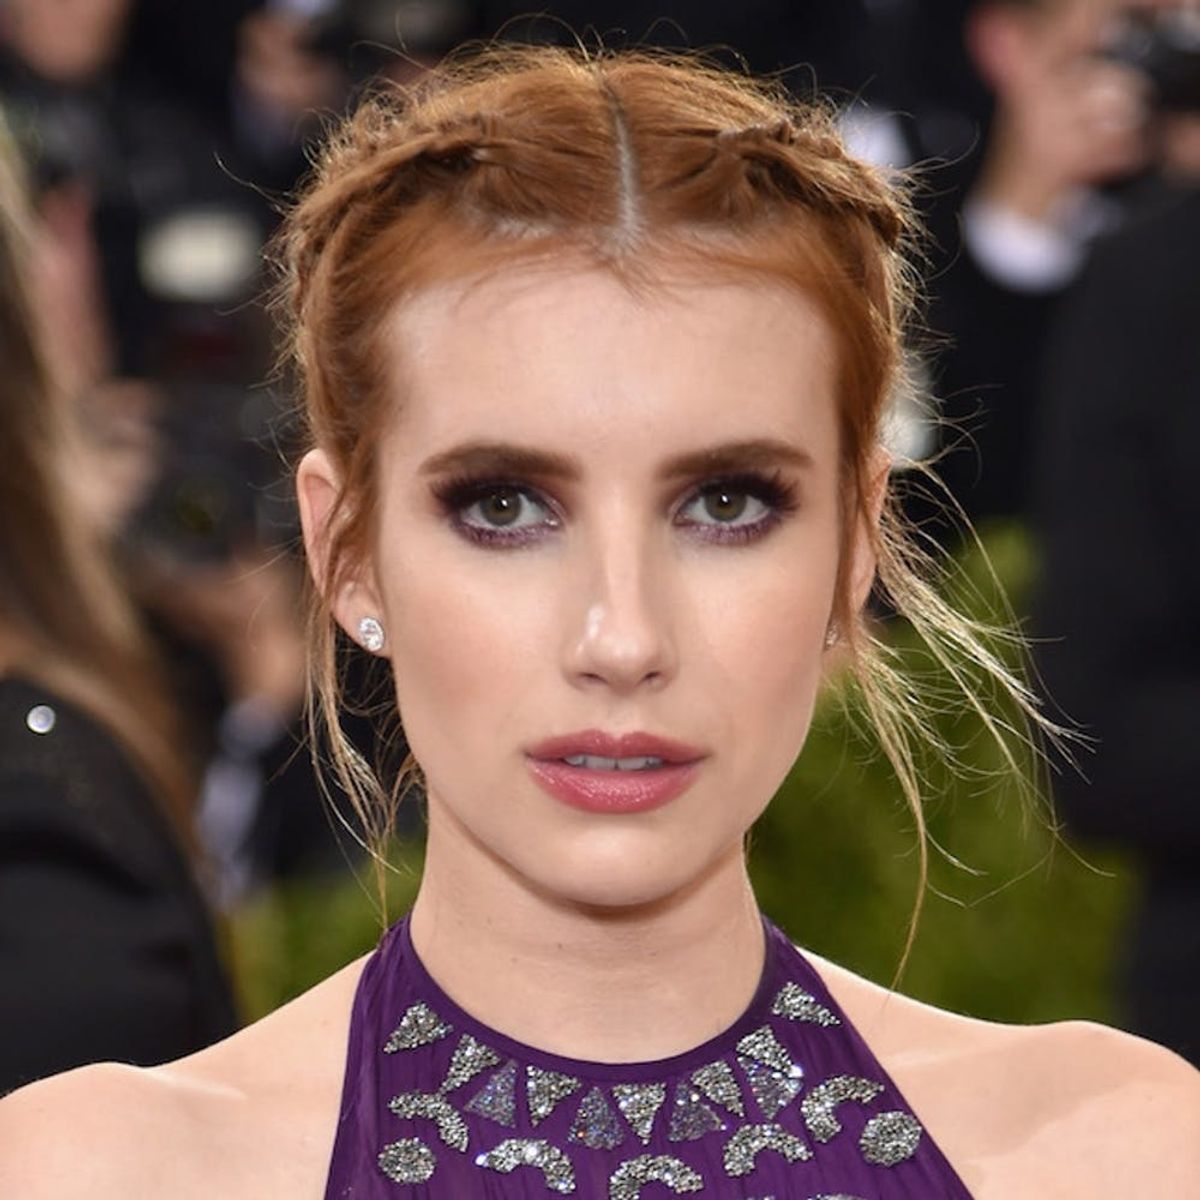 Forget Clutches. Emma Roberts’ Bag Is the Perfect Summer Wedding Accessory